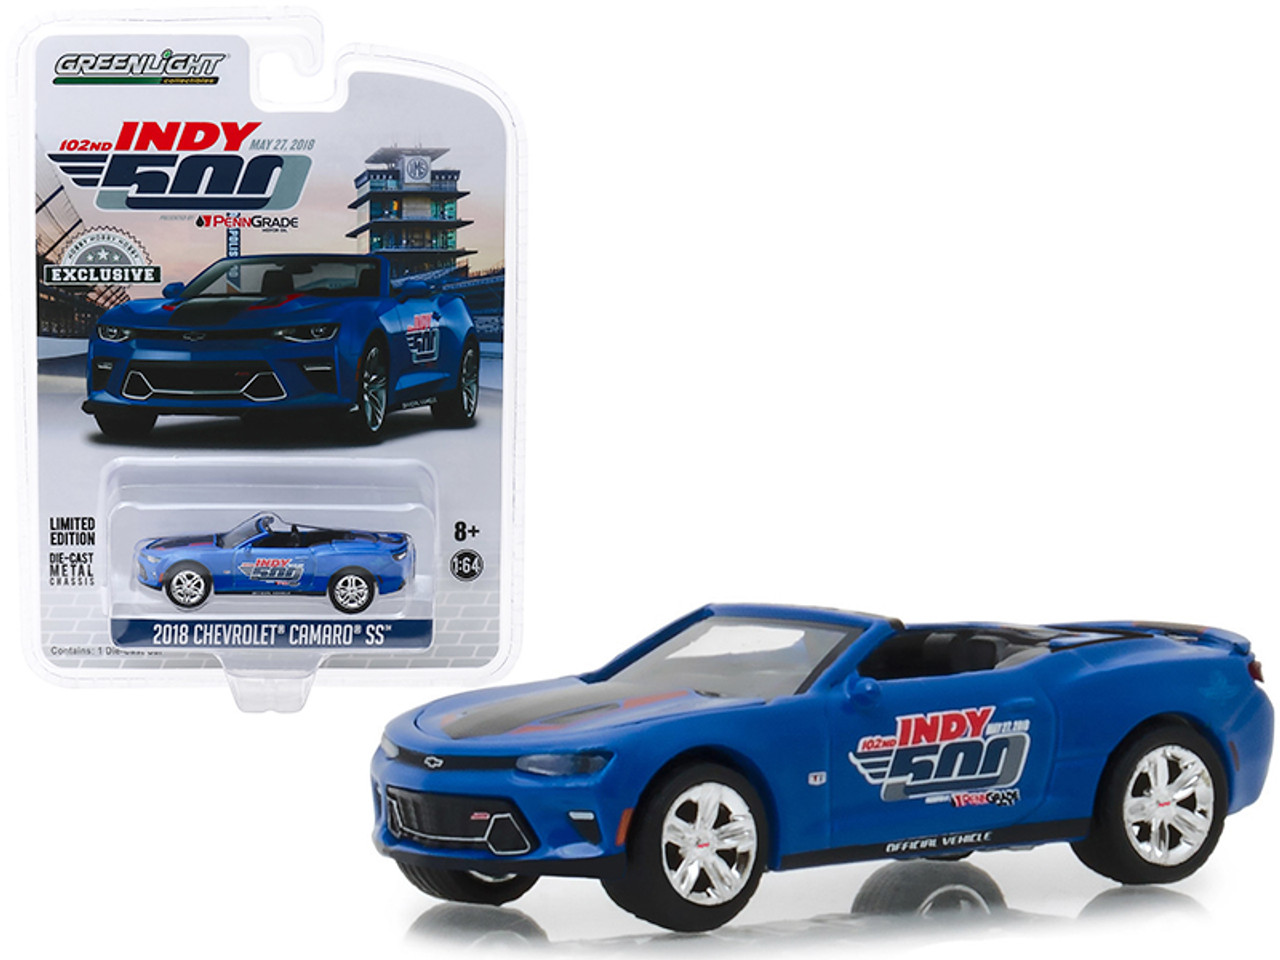 1/64 Greenlight 2018 Chevrolet Camaro SS Convertible Blue "102nd Indy 500 Presented" by PennGrade Motor Oil 500 Festival Event Car "Hobby Exclusive" Diecast Car Model